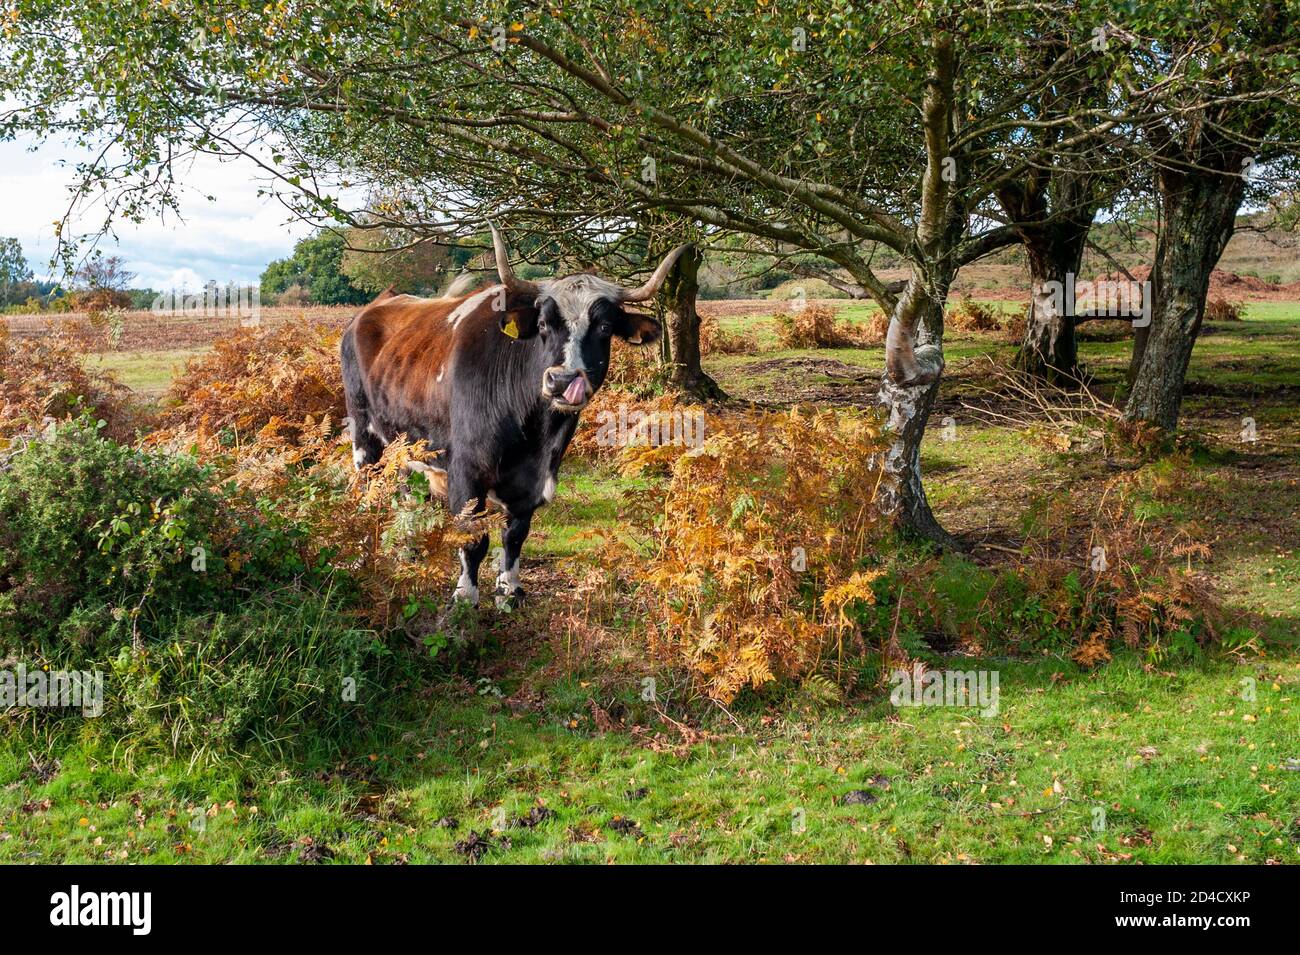 New Forest long-horned cow Stock Photo